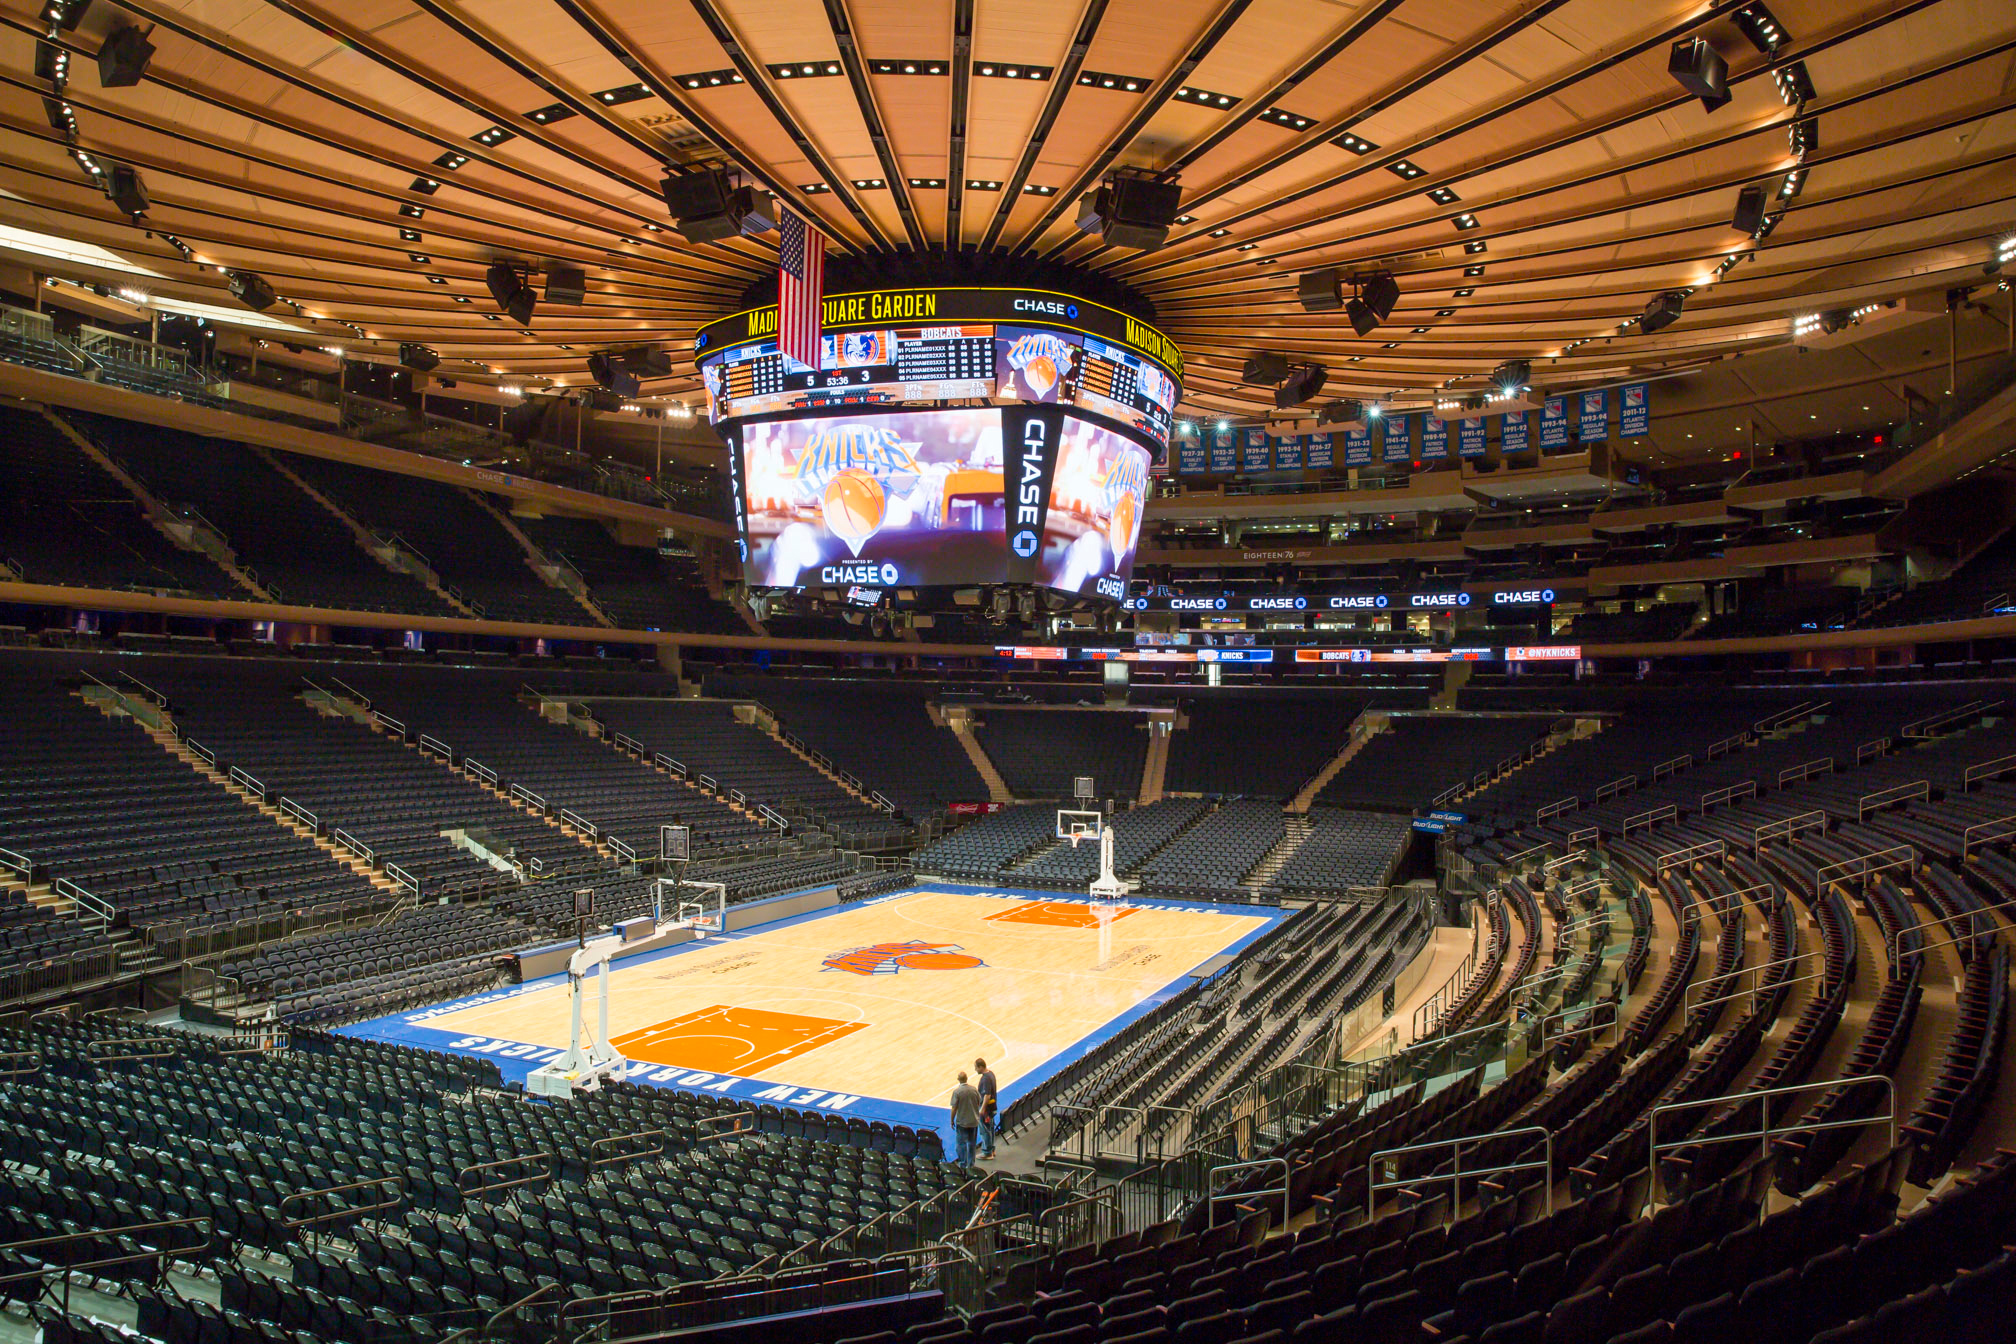 Check out Madison Square Garden in New York (PHOTOS) | BOOMSbeat